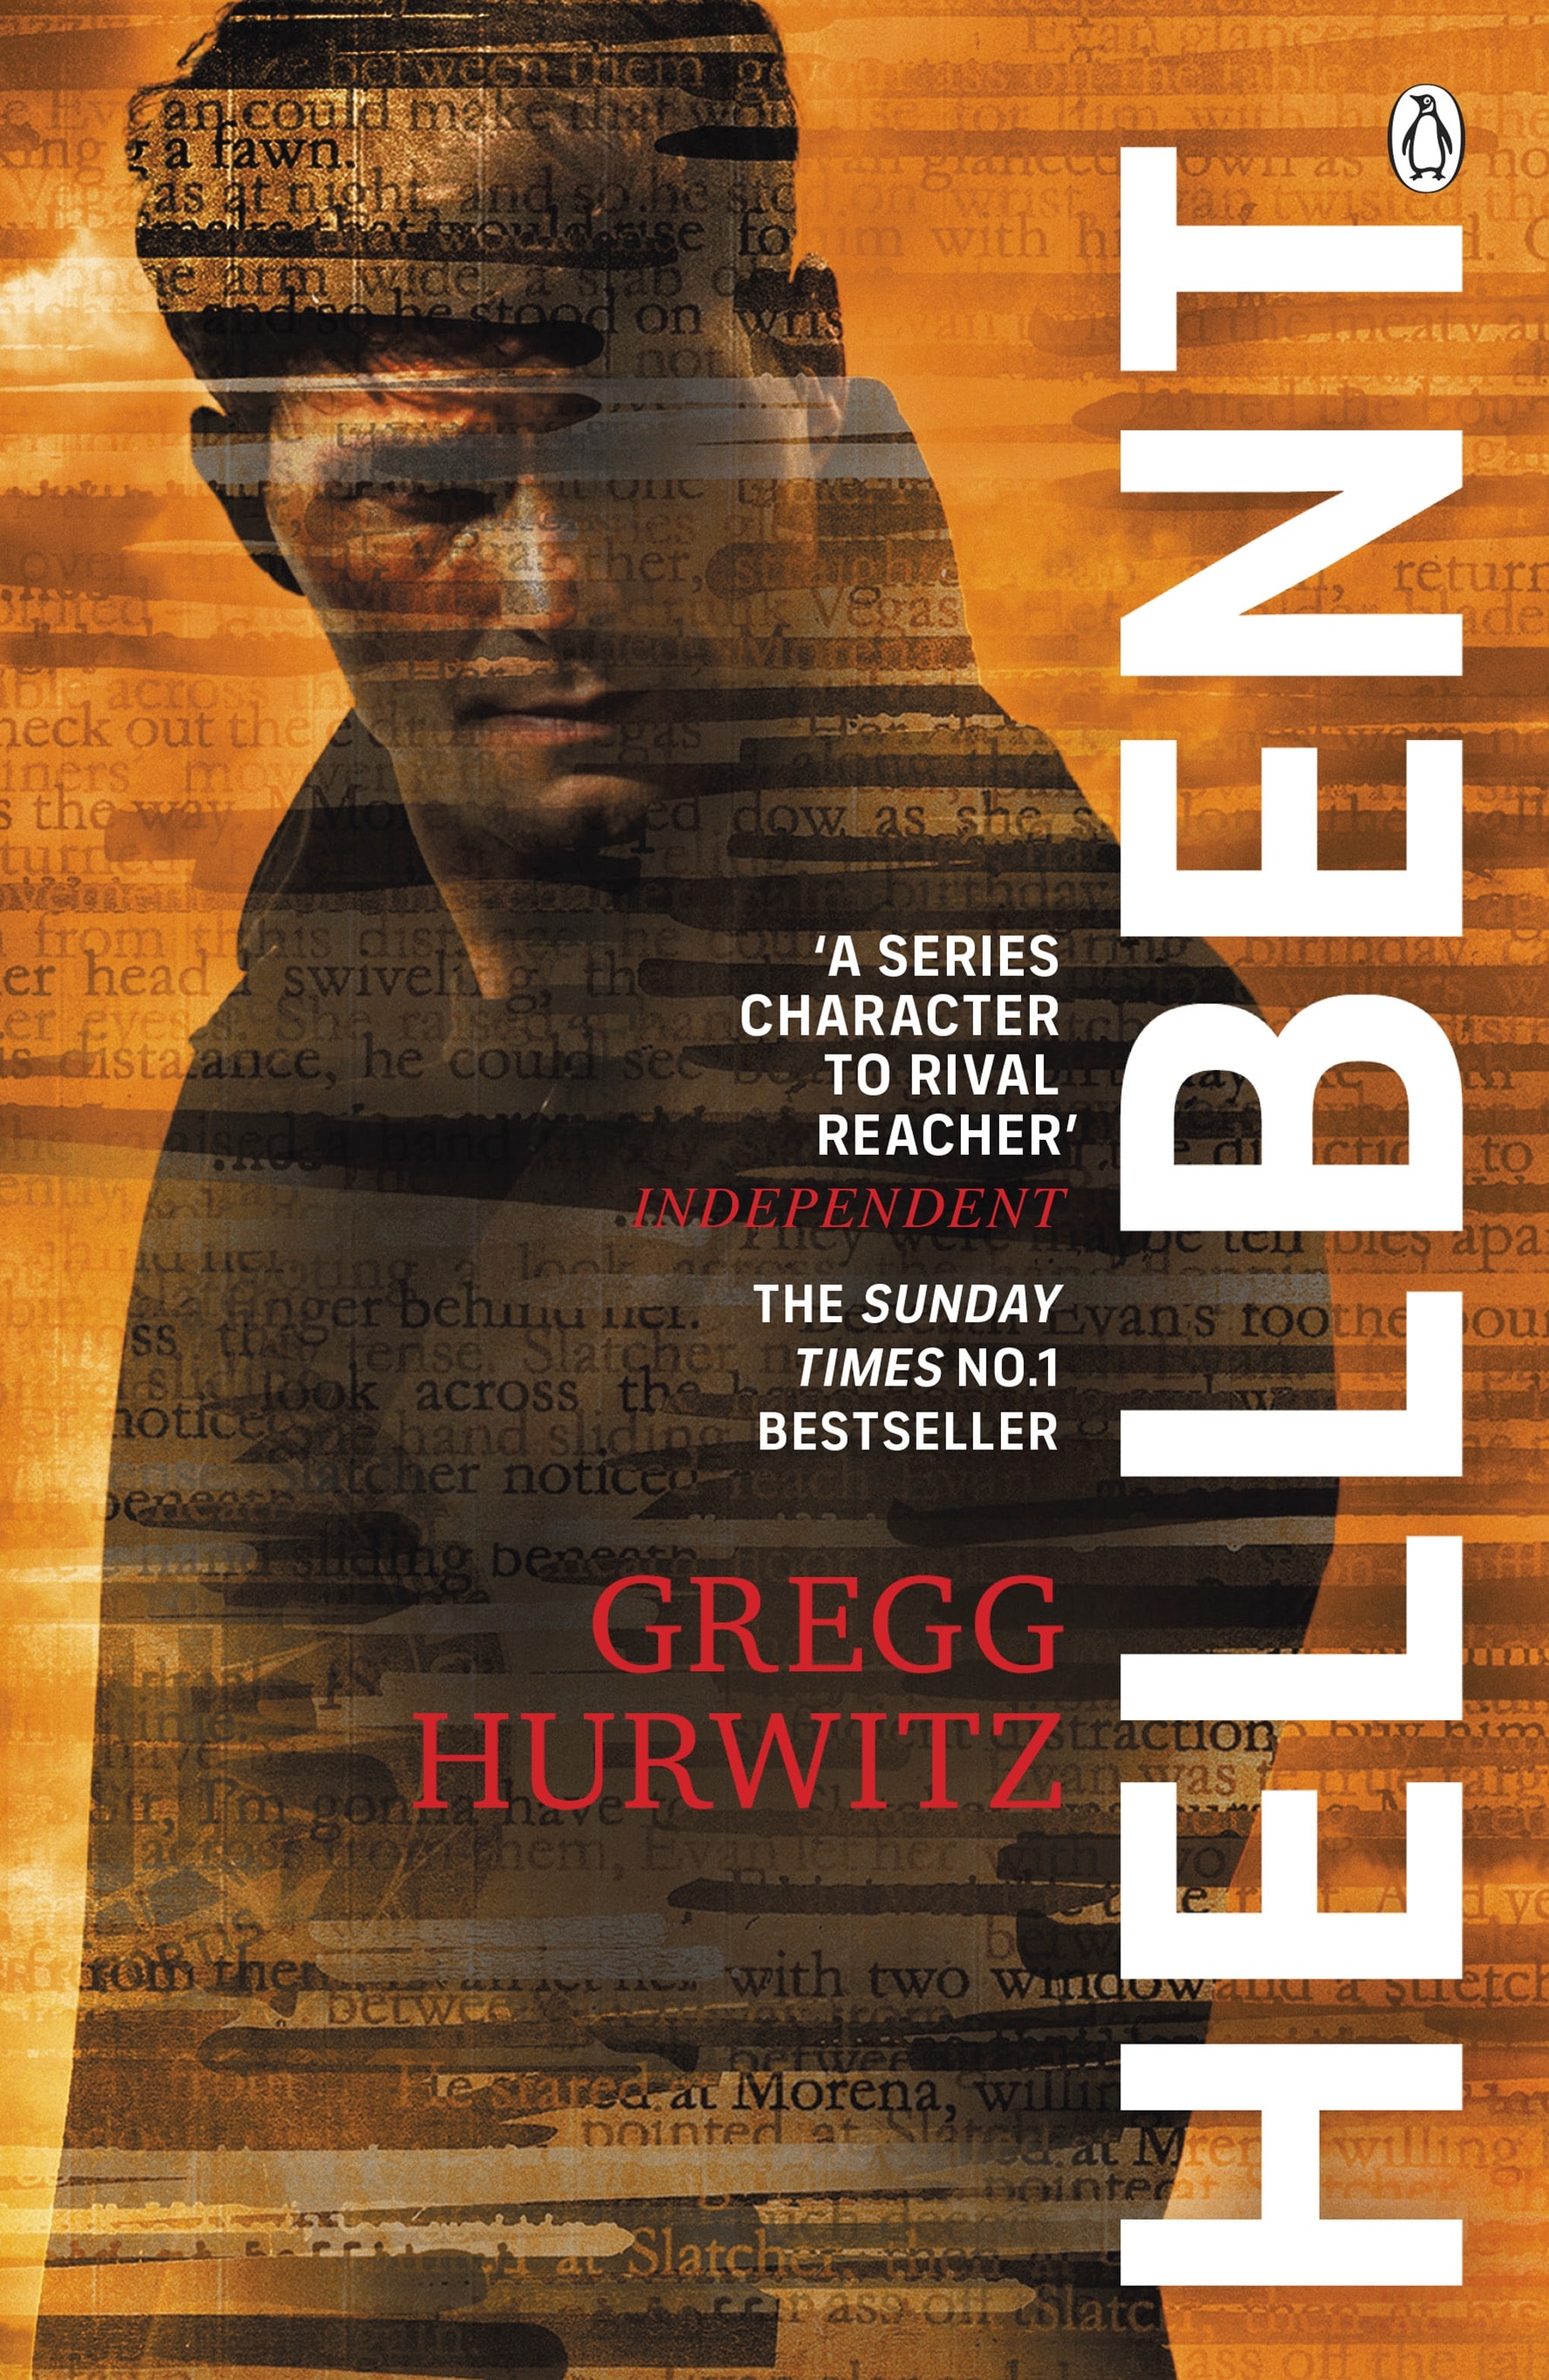 Gregg Hurwitz's Orphan X books in order: Hellbent, book 3